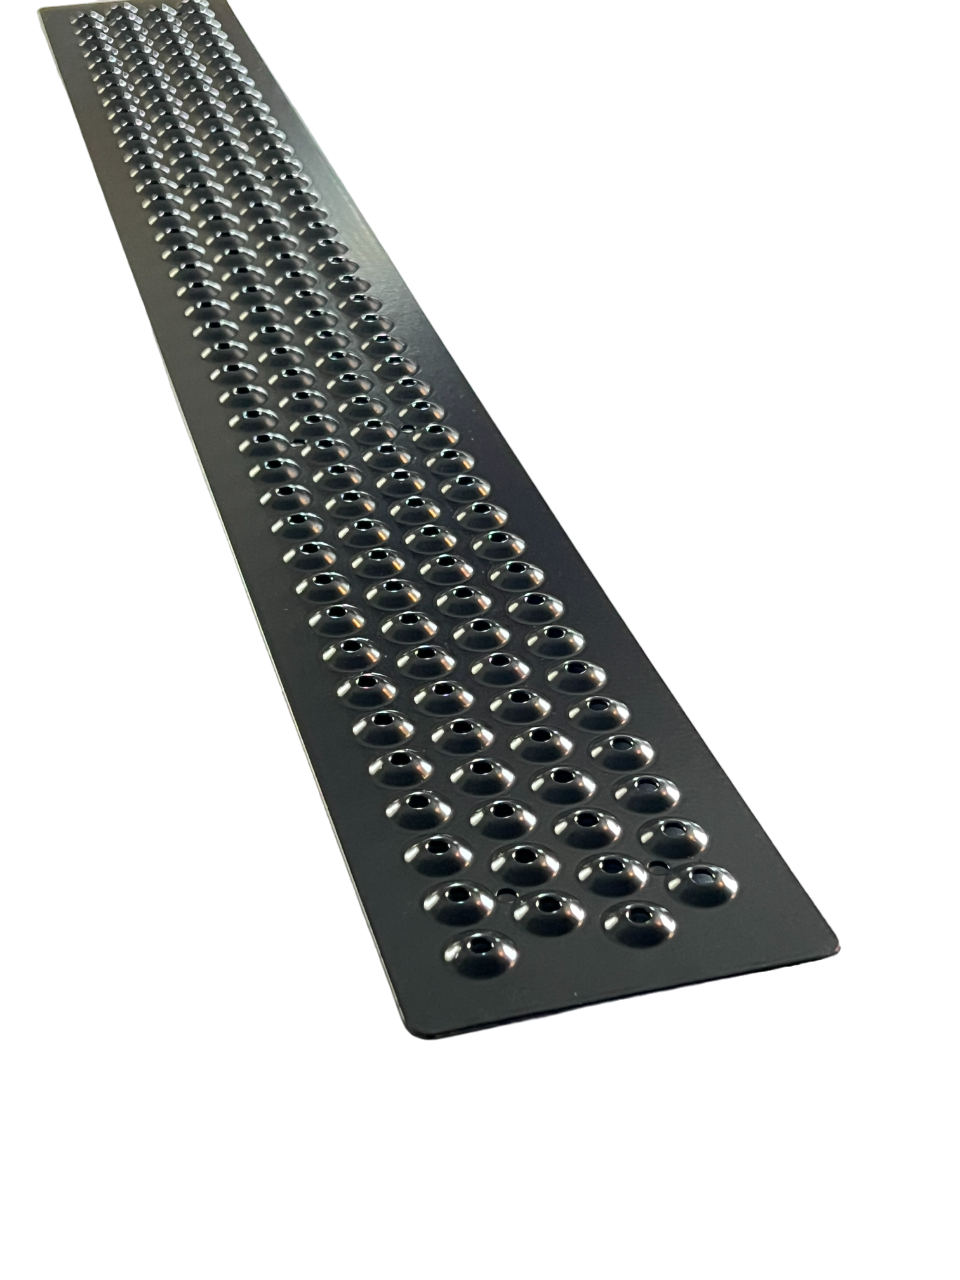 Aluminum Stair Cover Treads - Signal Black, Includes Stainless Steel 1